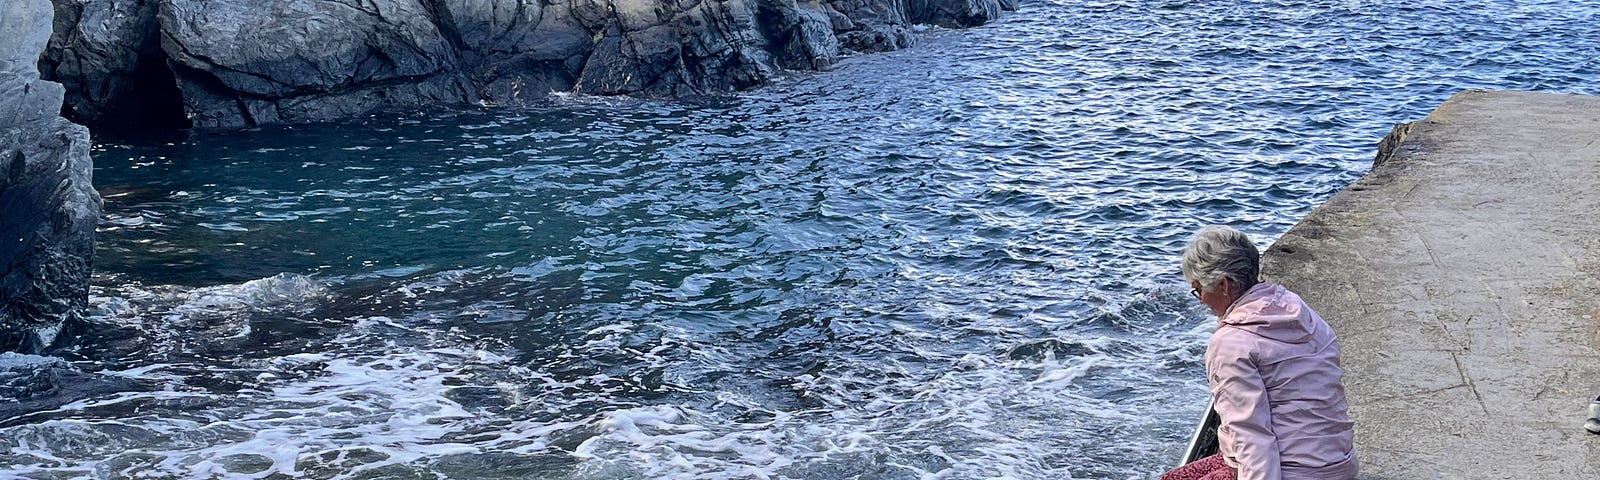 Author’s toes in the water via a boat ramp adjacent to the Ligurian Sea, Manarola, Italy.